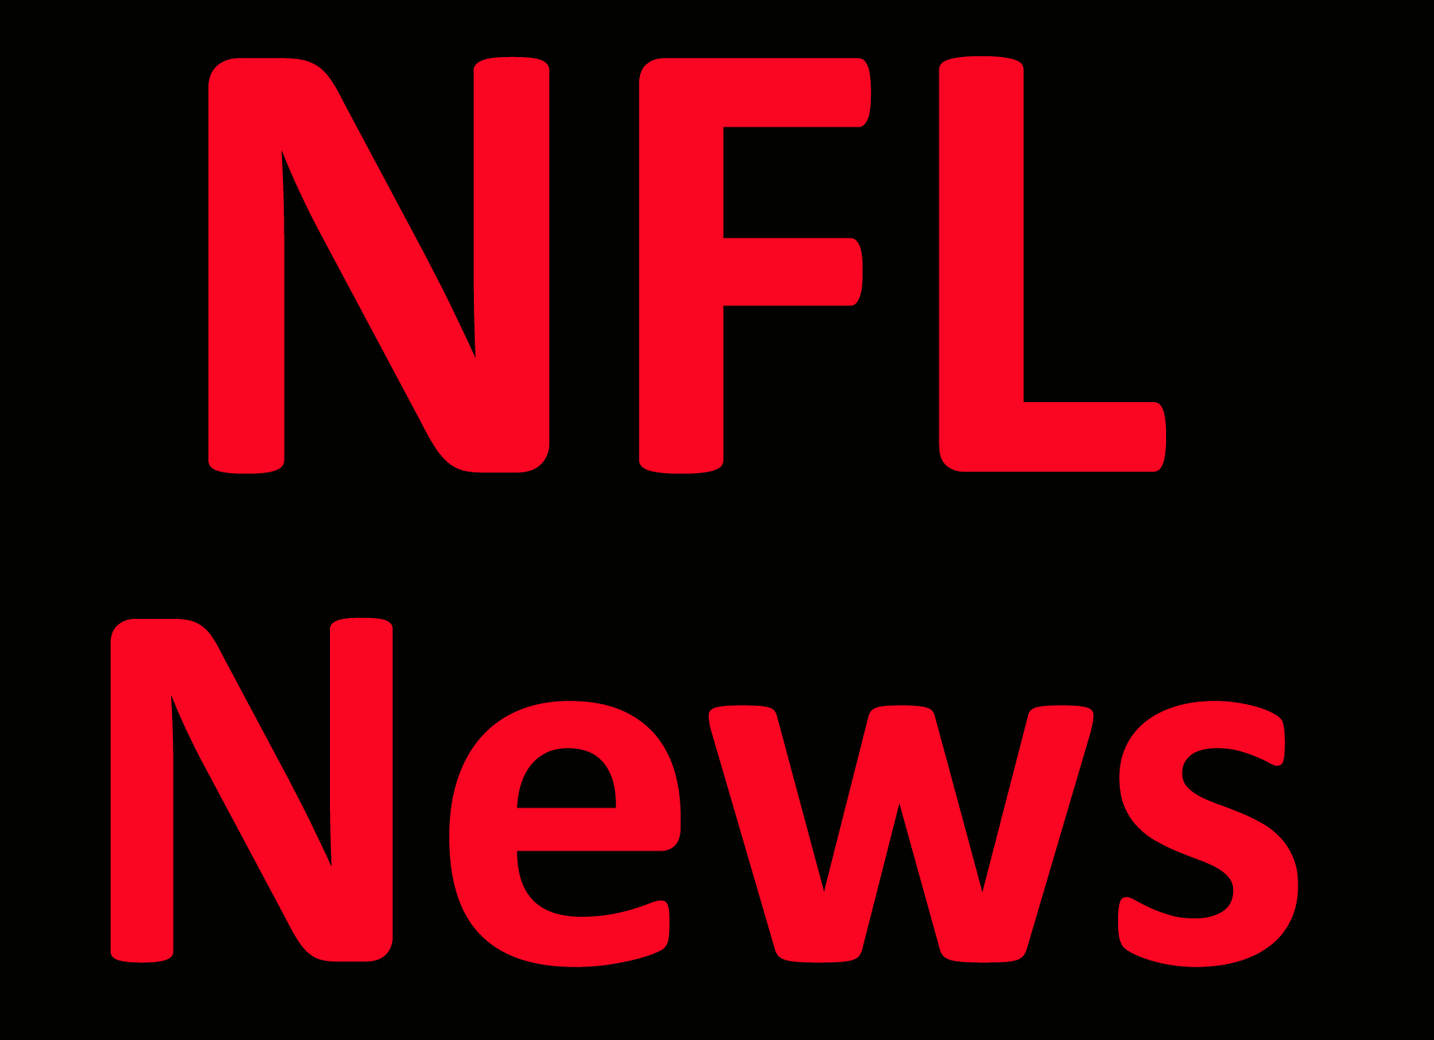 NFL News: Daily Notes: Fields, Mixon among players injured Sunday Per Report